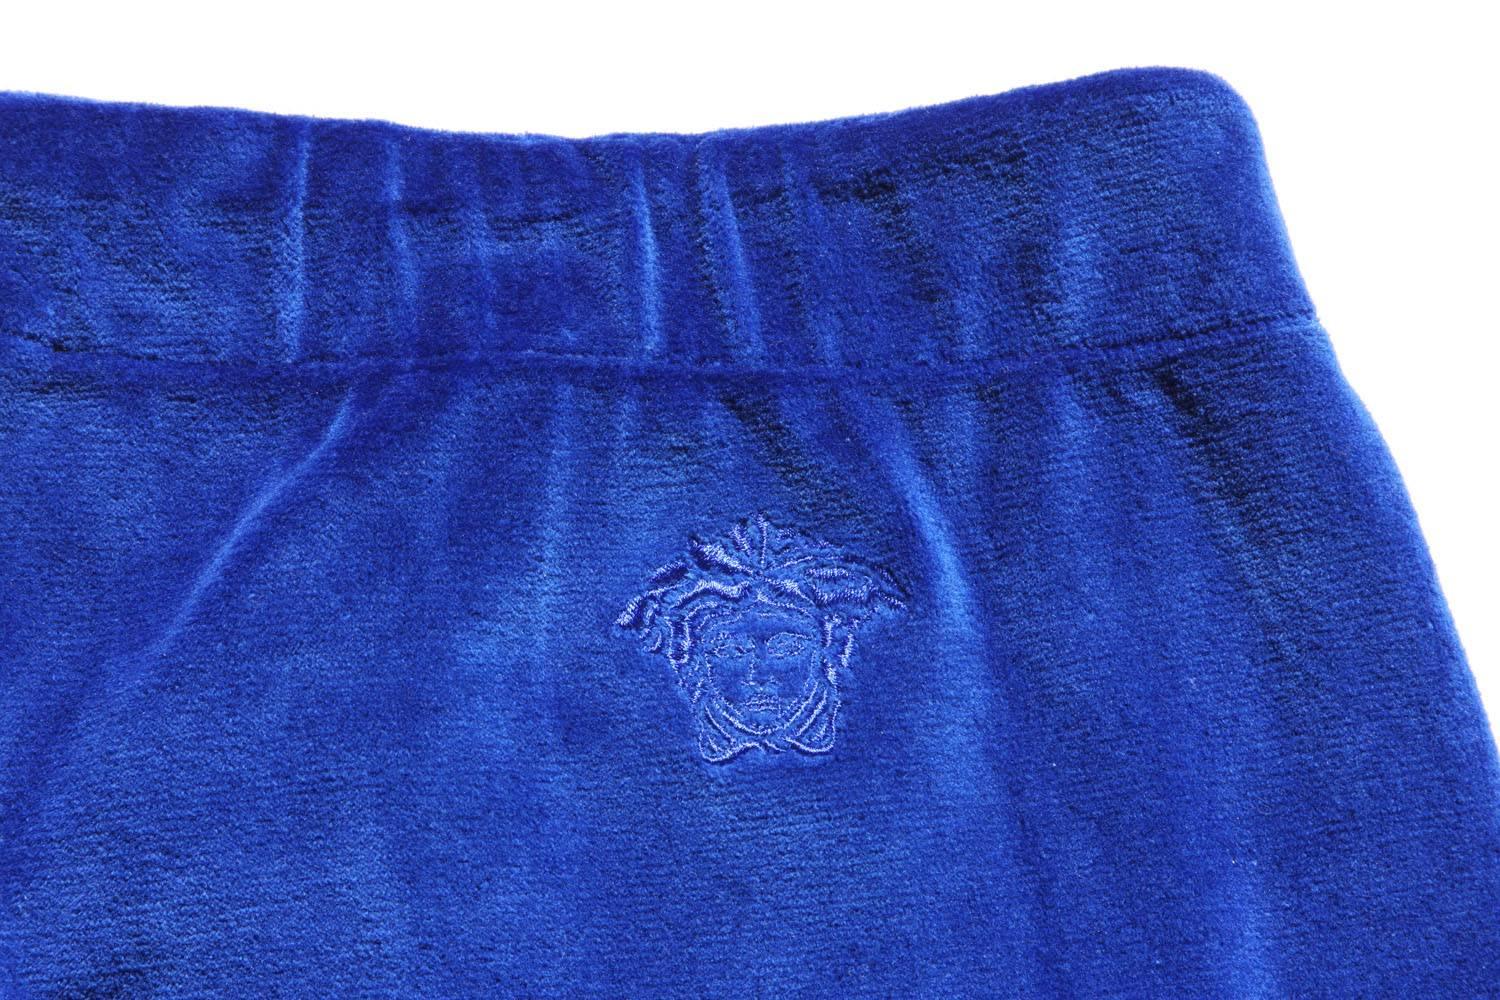 New Versace Medusa Logo Men's Blue Velvet Sweatpants Black Leather Trim size XL In New Condition For Sale In Montgomery, TX